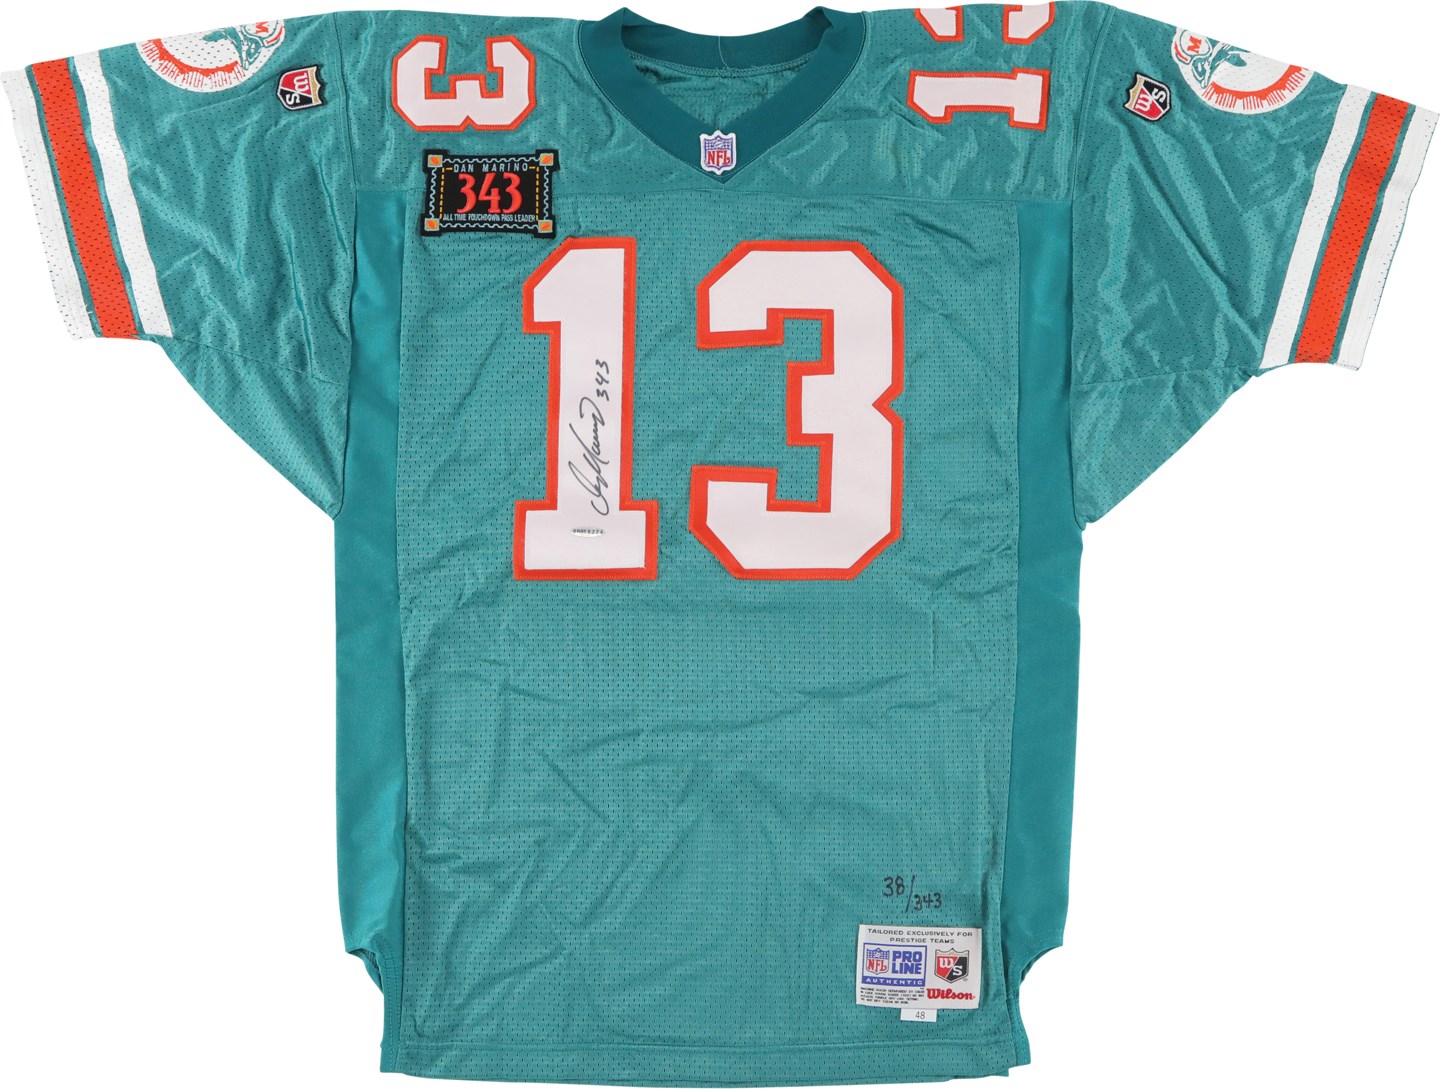 - Dan Marino Limited Edition Signed "343" Miami Dolphins Jersey (UDA)